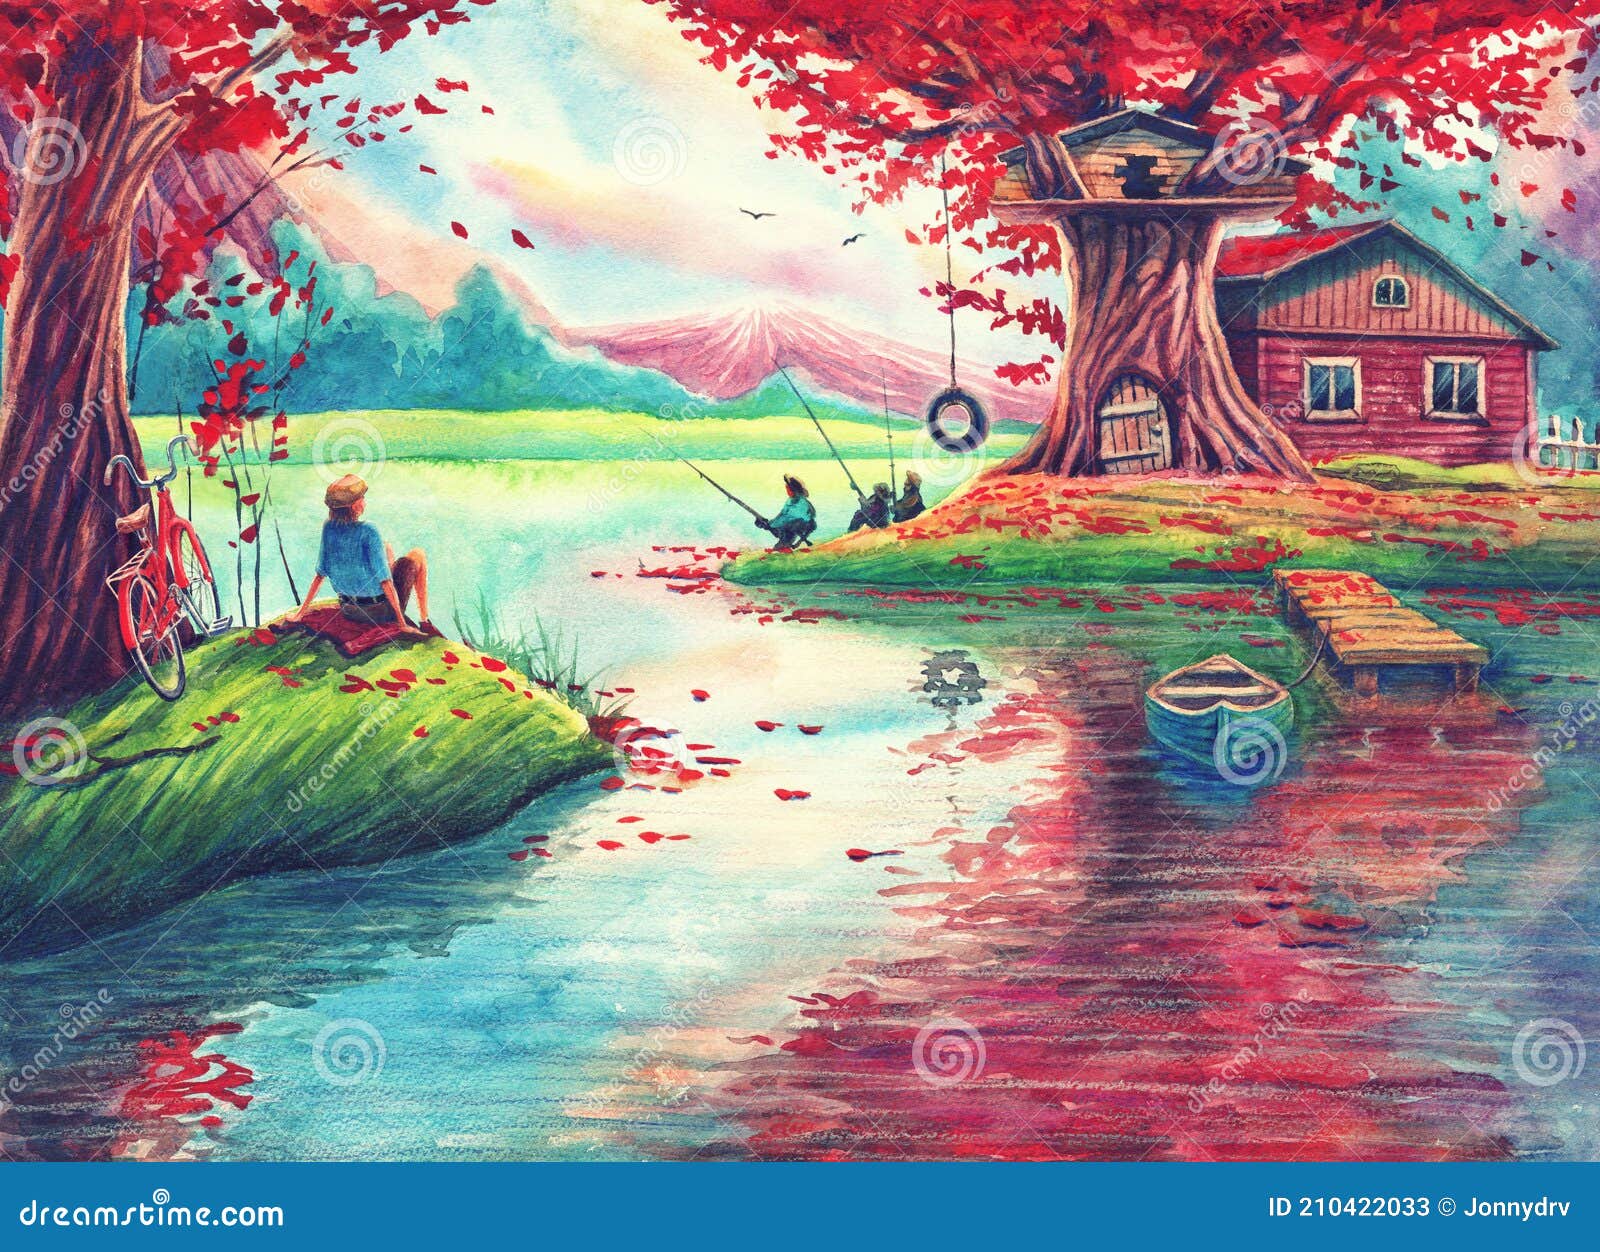 Magic Watercolor Landscape Painting Art with Pink Trees, Lake, Fishing  Lodge, Fantasy Forest, Hand Drawn Nature Illustration Art Stock  Illustration - Illustration of drawn, clouds: 210422033